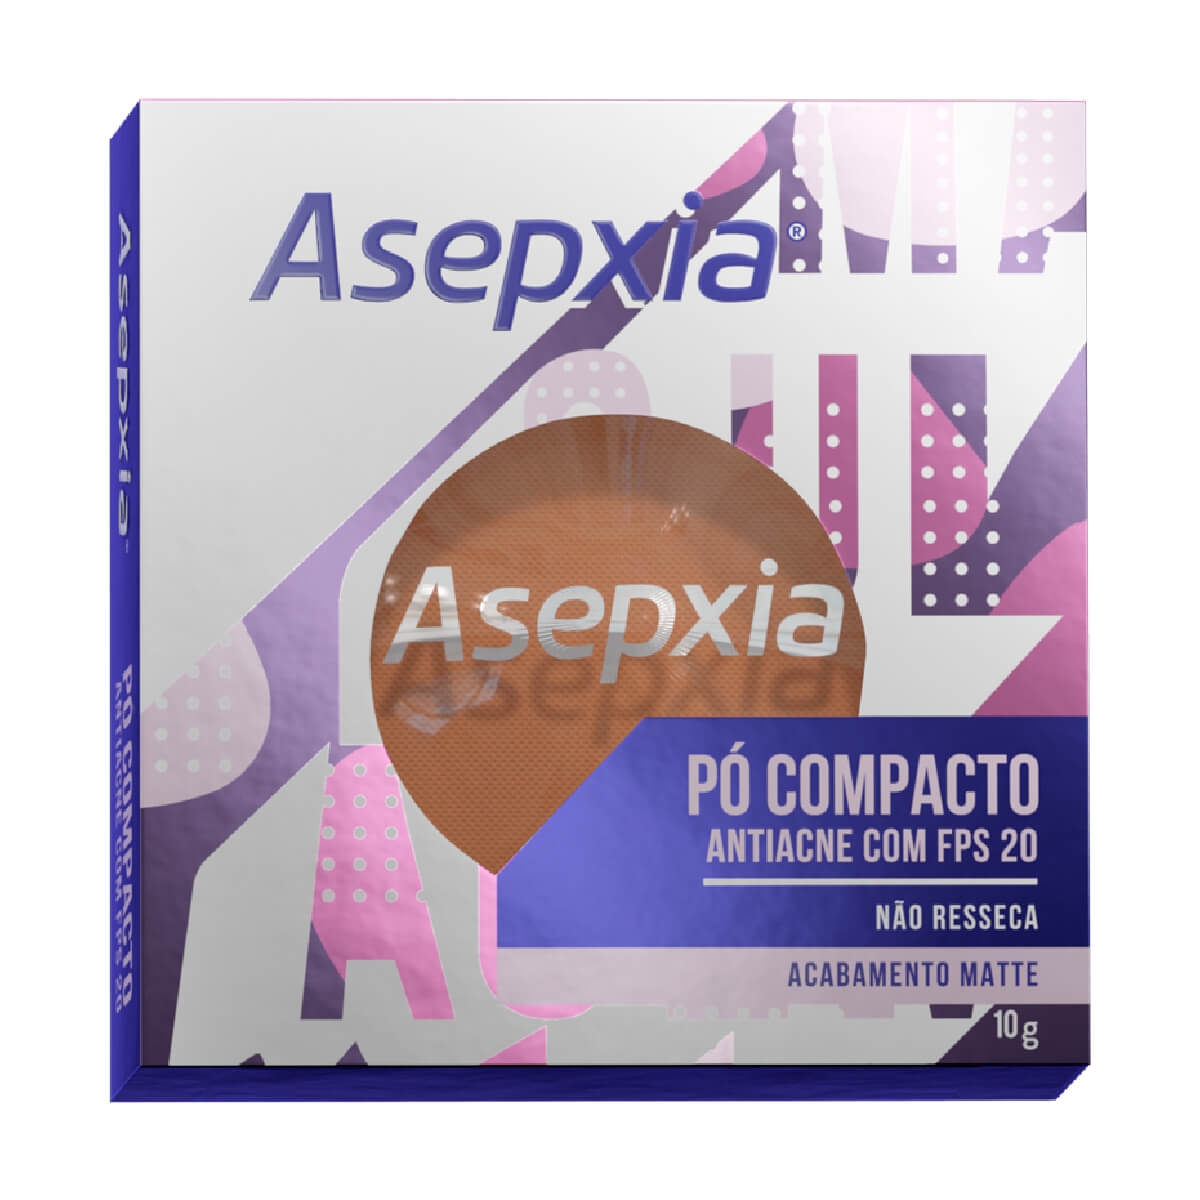 Pó Compacto Asepxia Antiacne Cor Marrom FPS20 10g